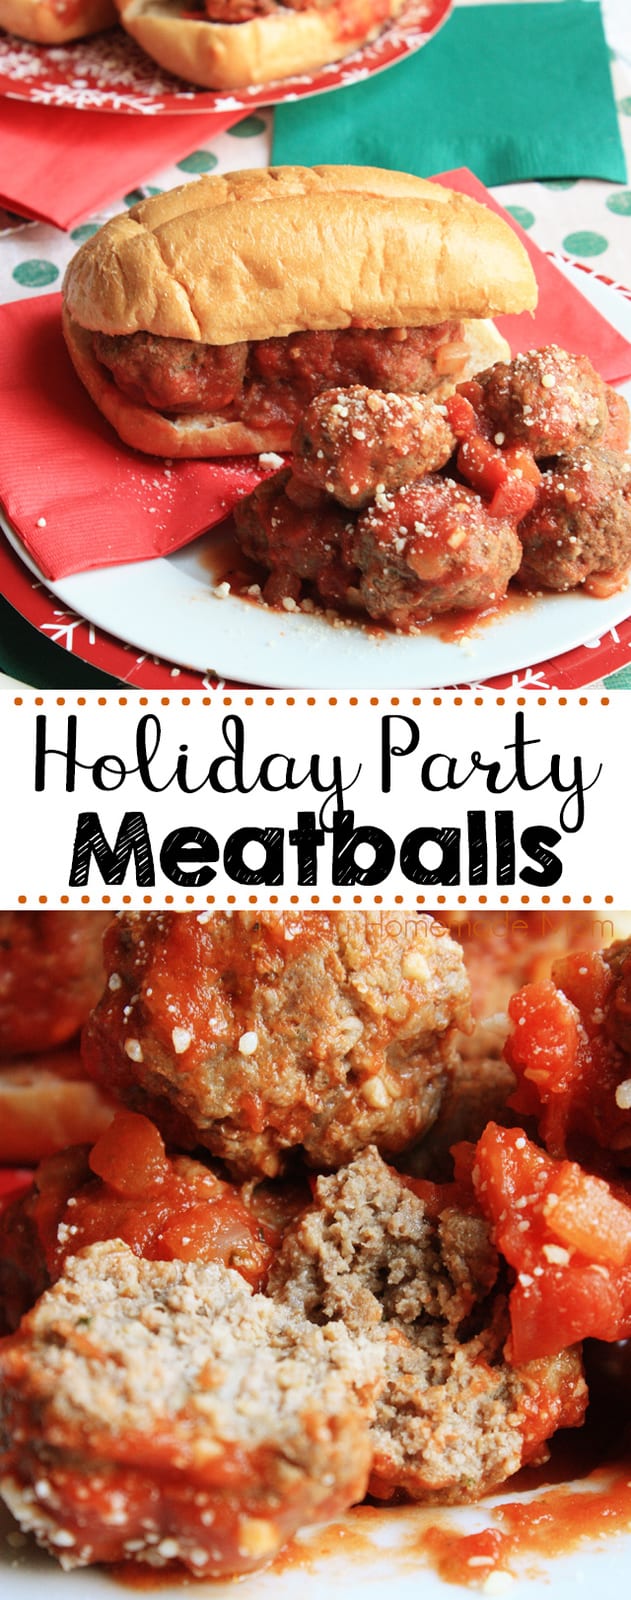 Holiday Party Meatballs - Mostly Homemade Mom